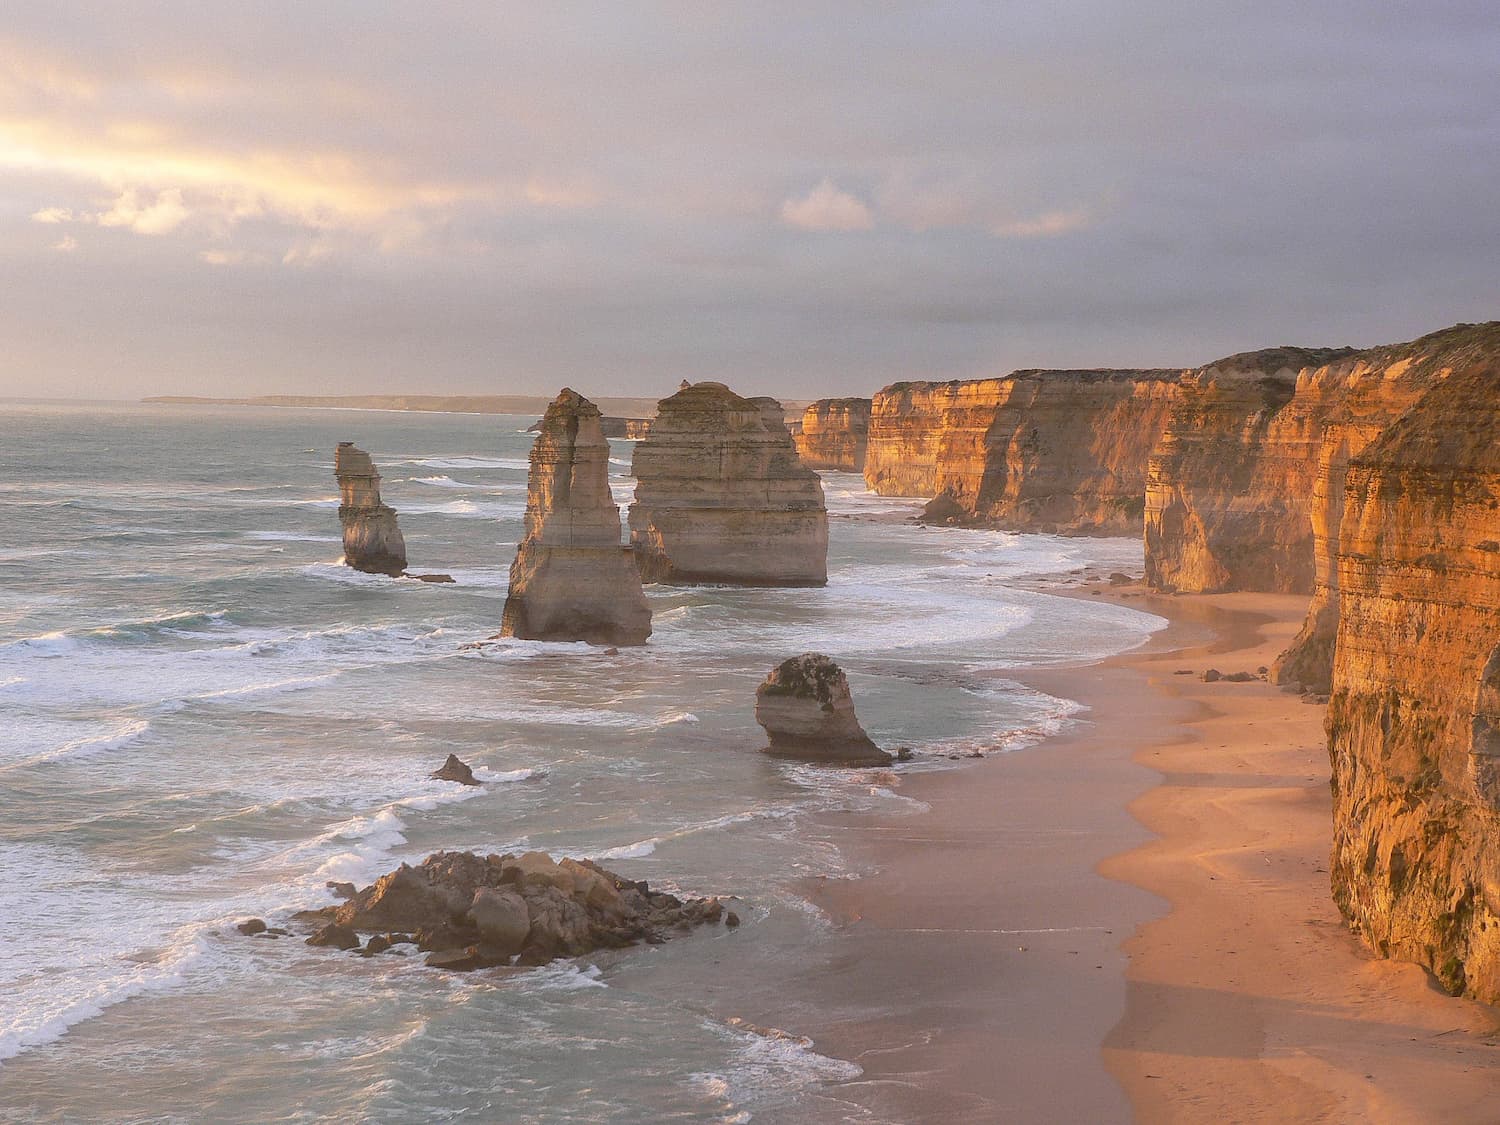 A view of a beach at 12 Apostles, Great Ocean Road